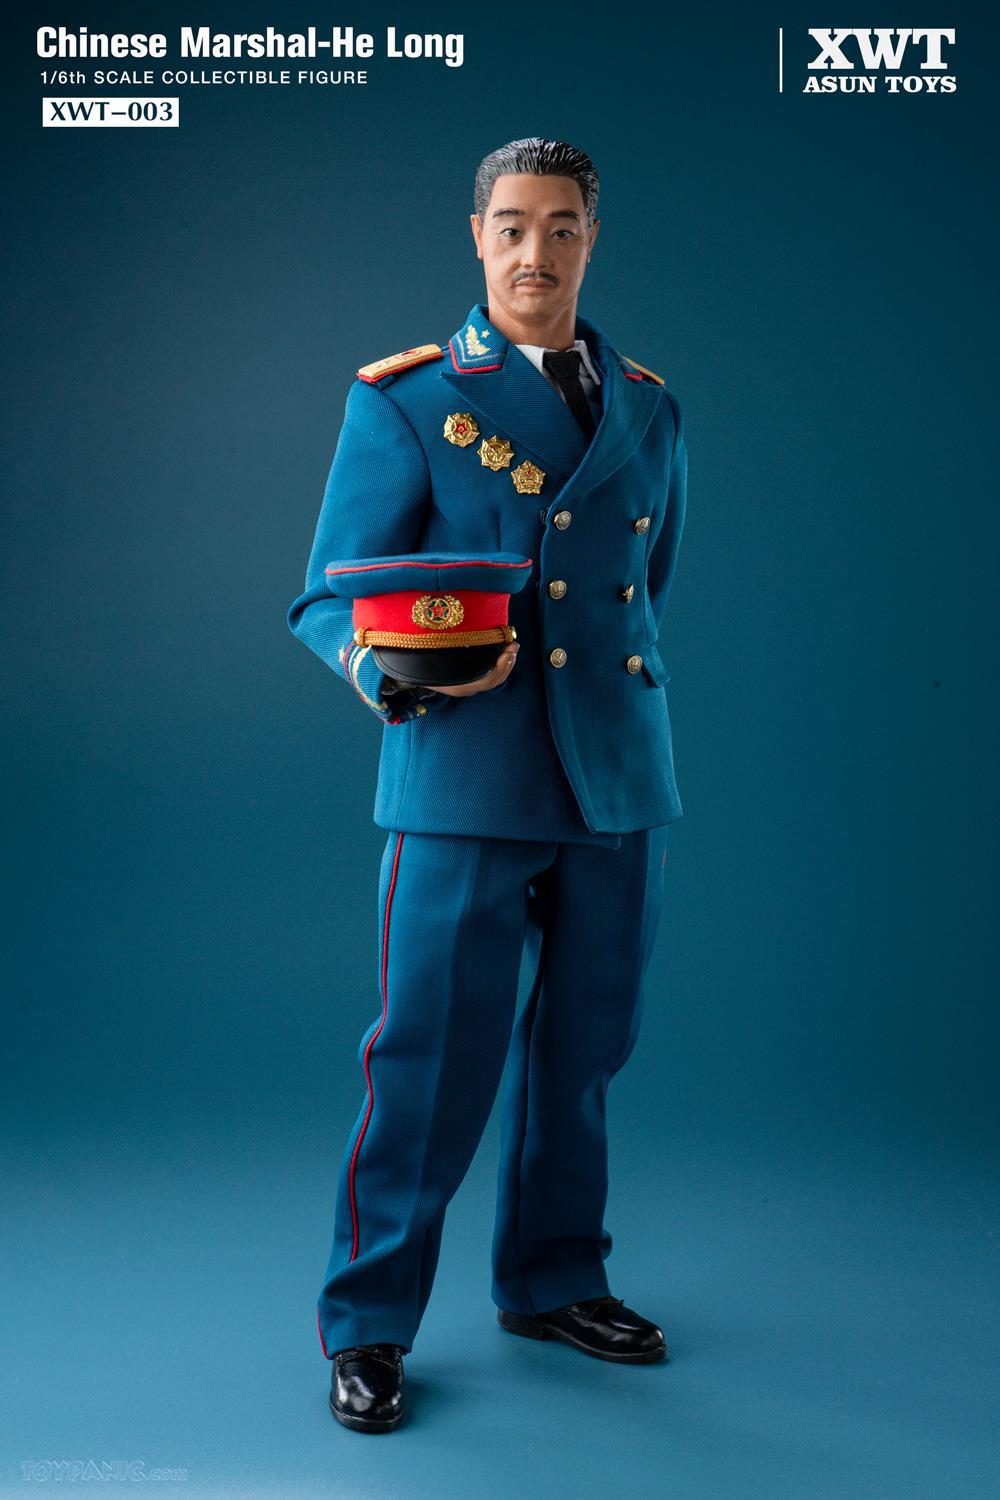 NEW PRODUCT: XWT ASUN TOYS: 1/6 Chinese Marshal - He Long (XWT-003) 14620221